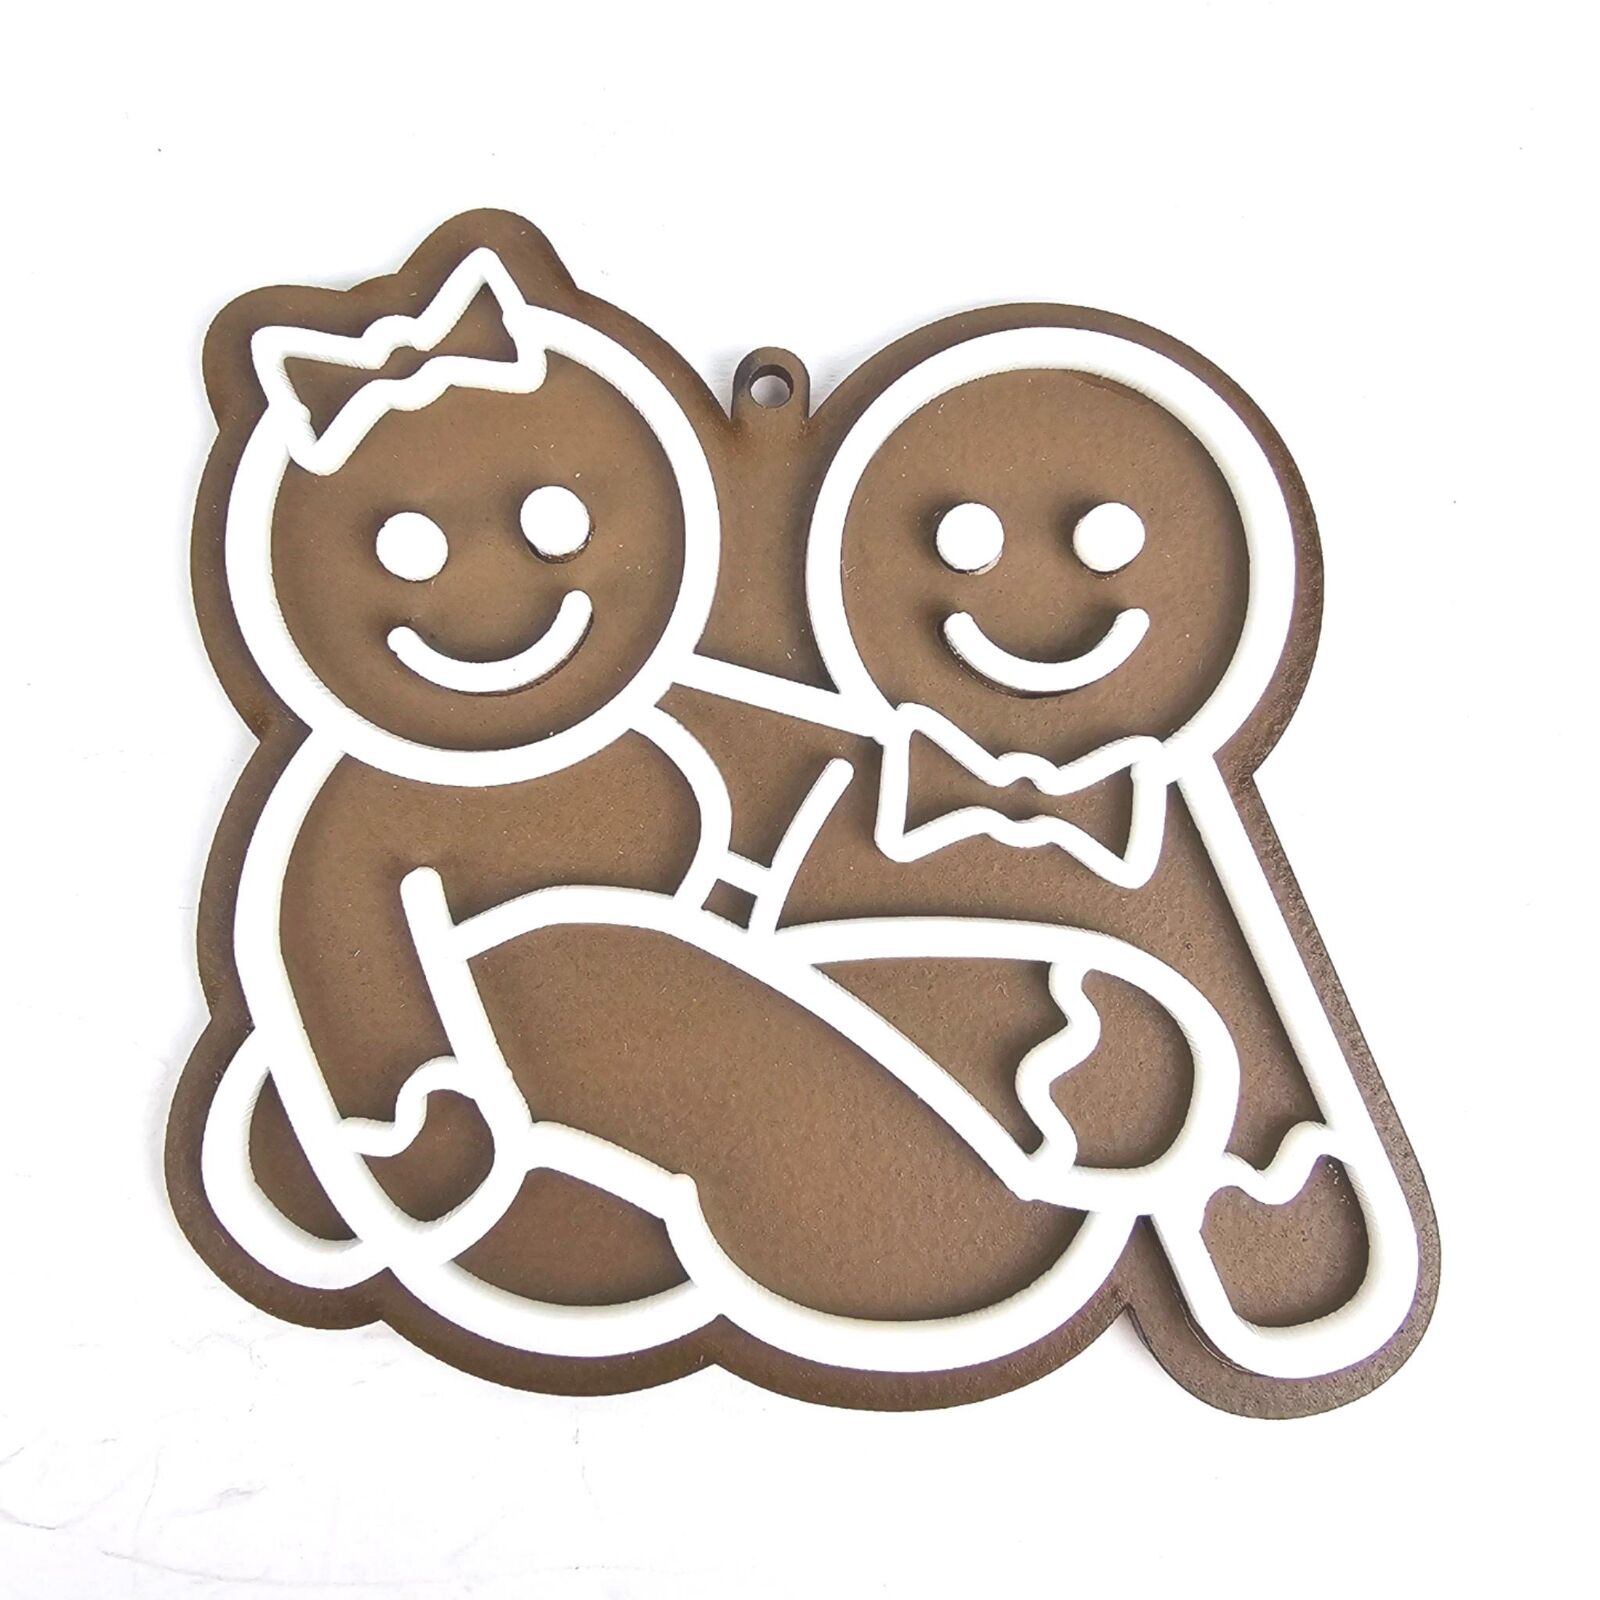 Naughty Gingerbread Cookie Christmas Ornament Adult Sexual Funny Scissoring